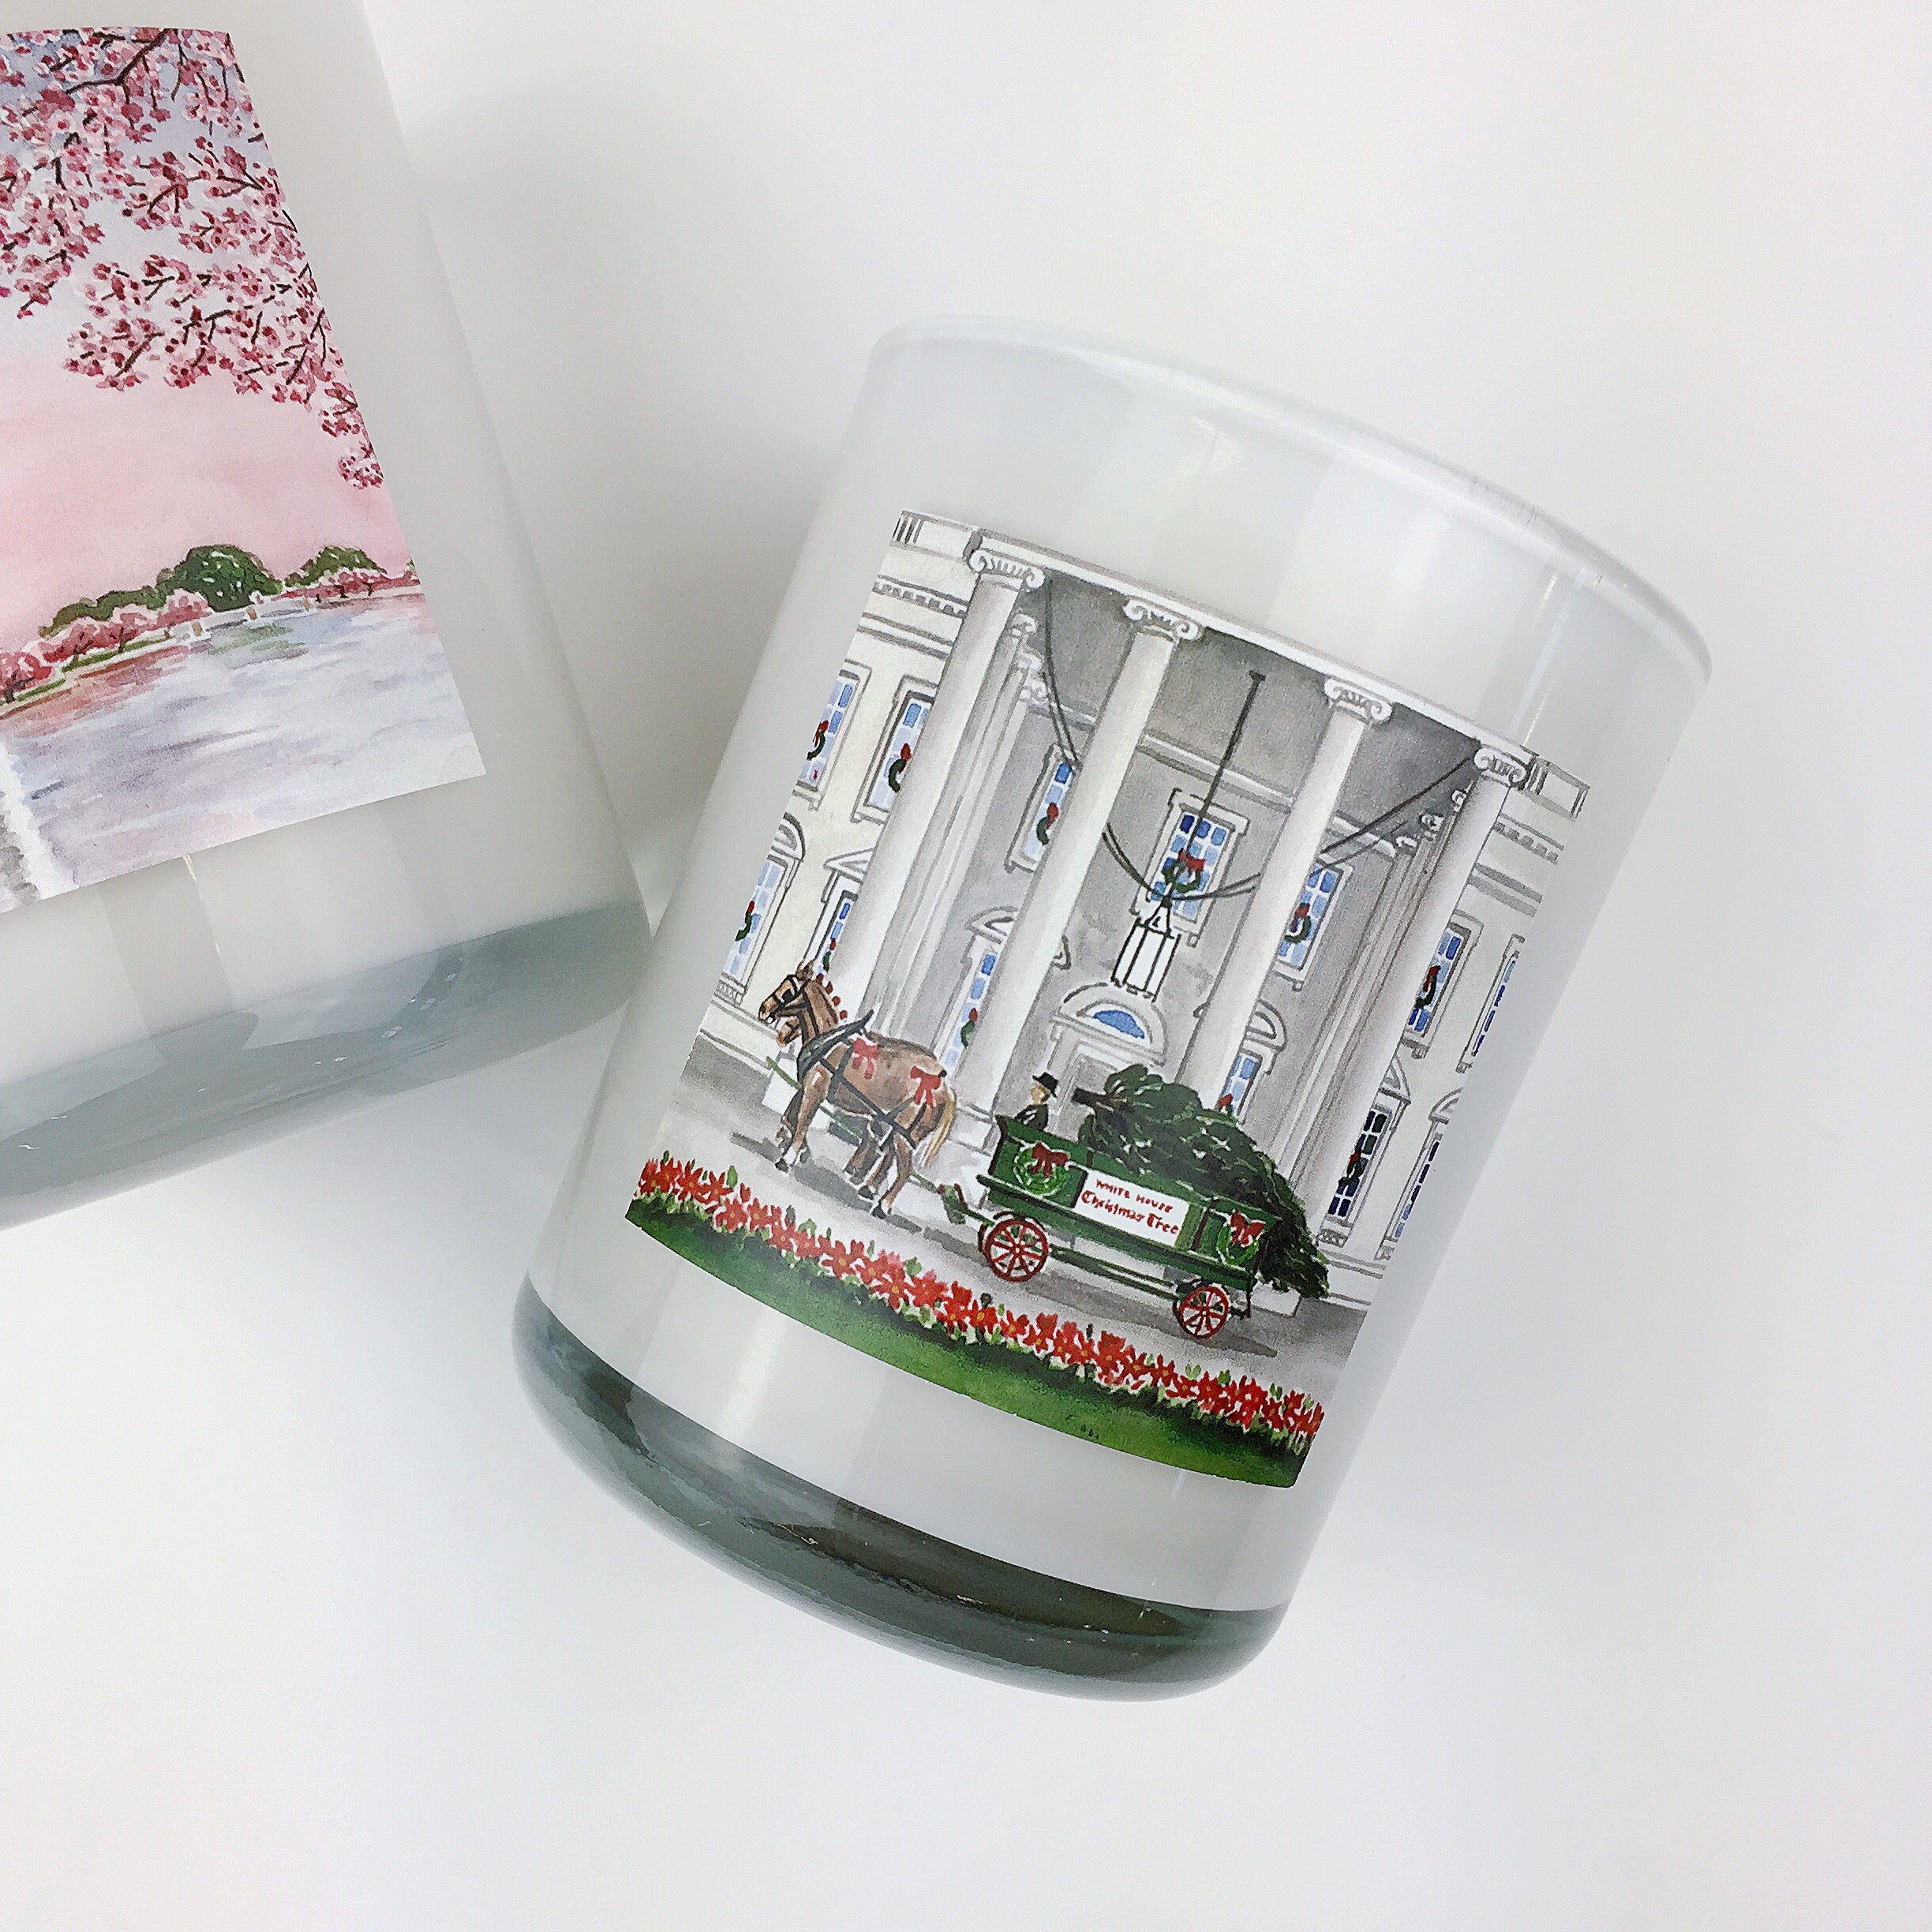 HOLIDAY AT THE WHITE HOUSE. Fraser Fir Coconut Wax Blend Candle.